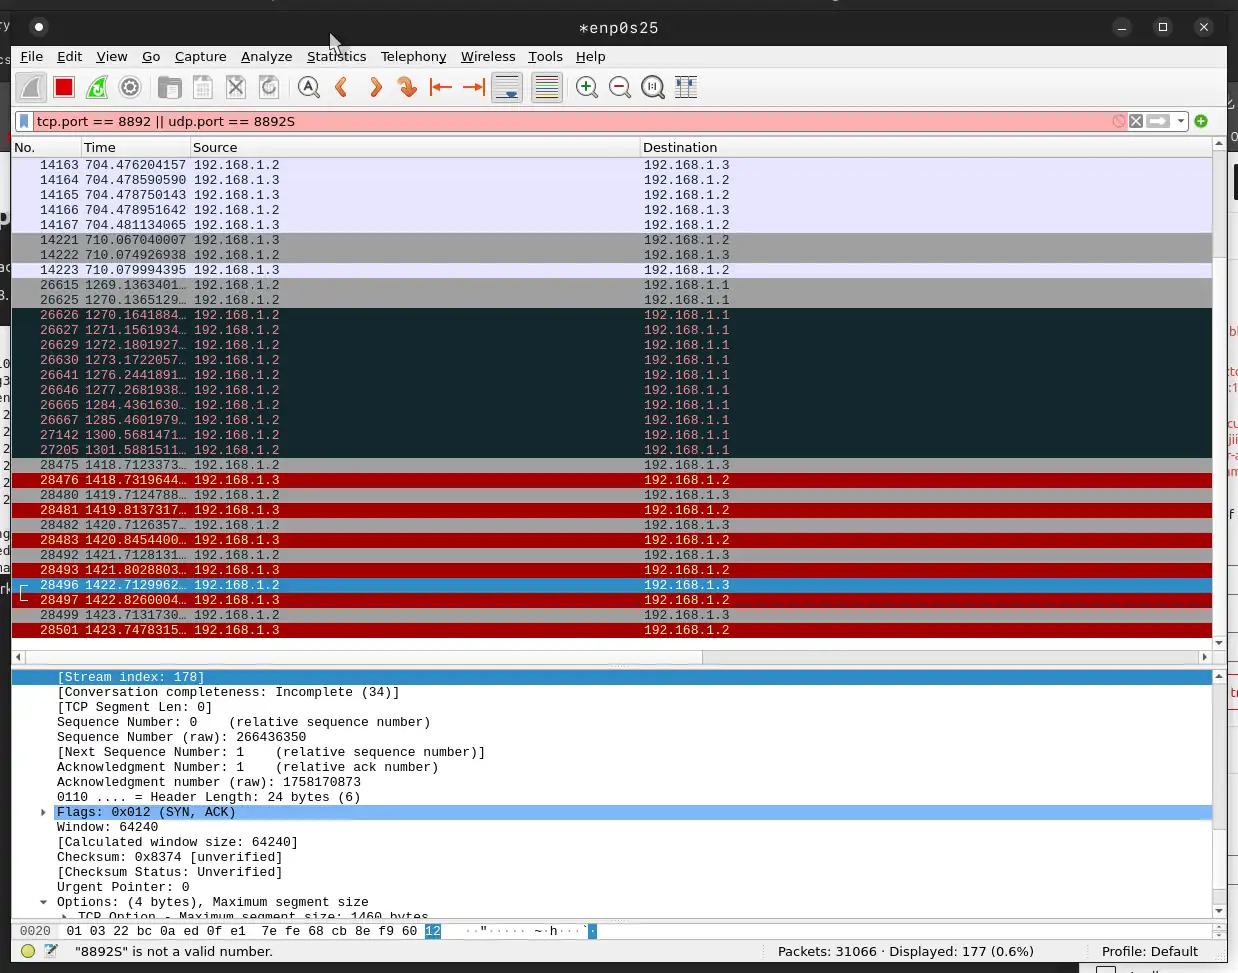 Viewing sent and received packets in Wireshark.